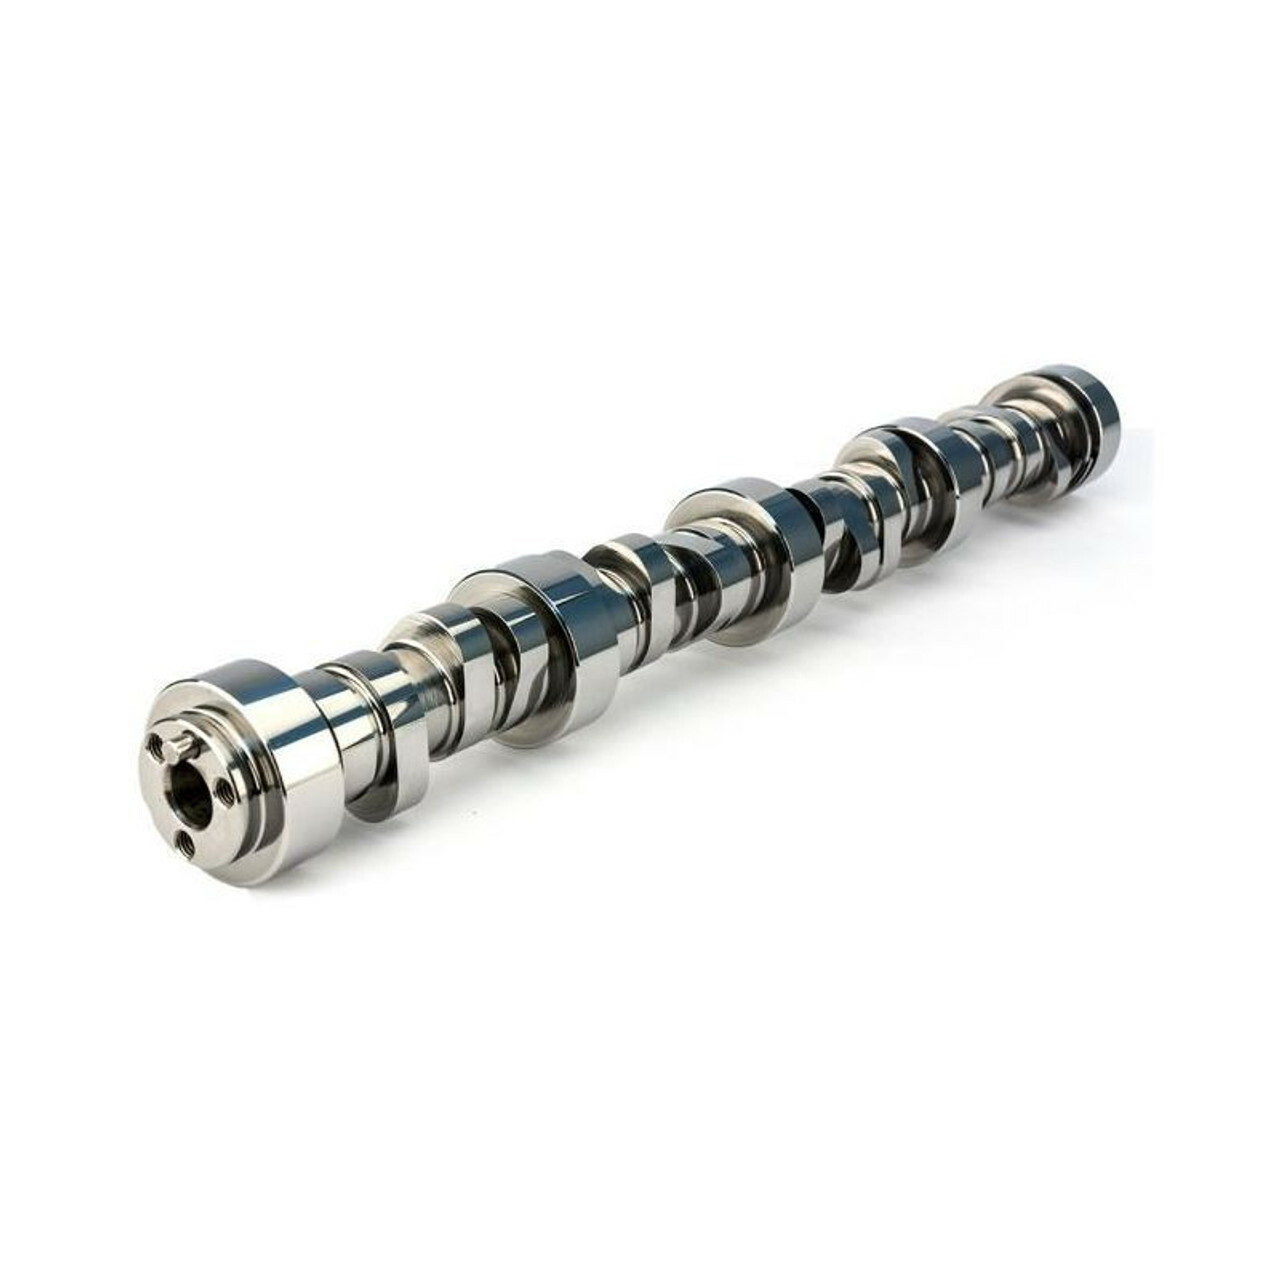 Chevy LS and LT Mechanical Roller Camshafts